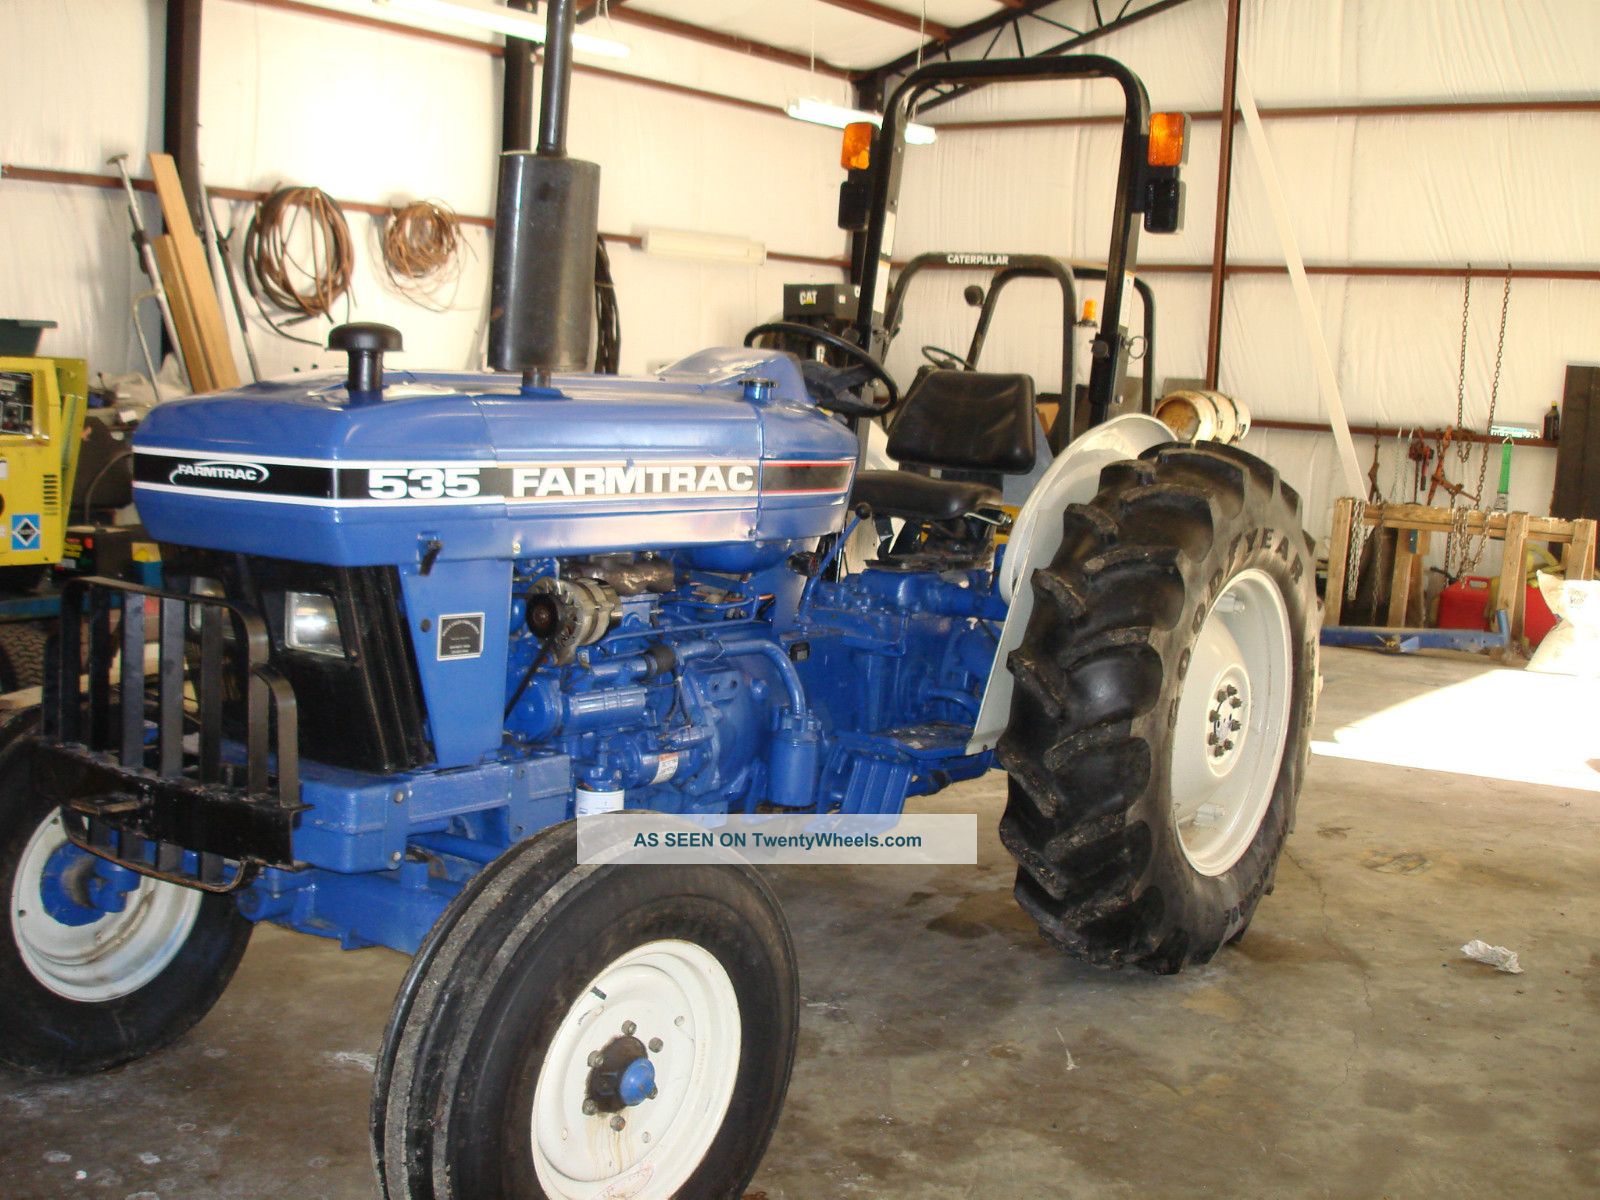 Tractor, 2007 Farmtrac 535, Only 269 Hours Total Time Tractors photo